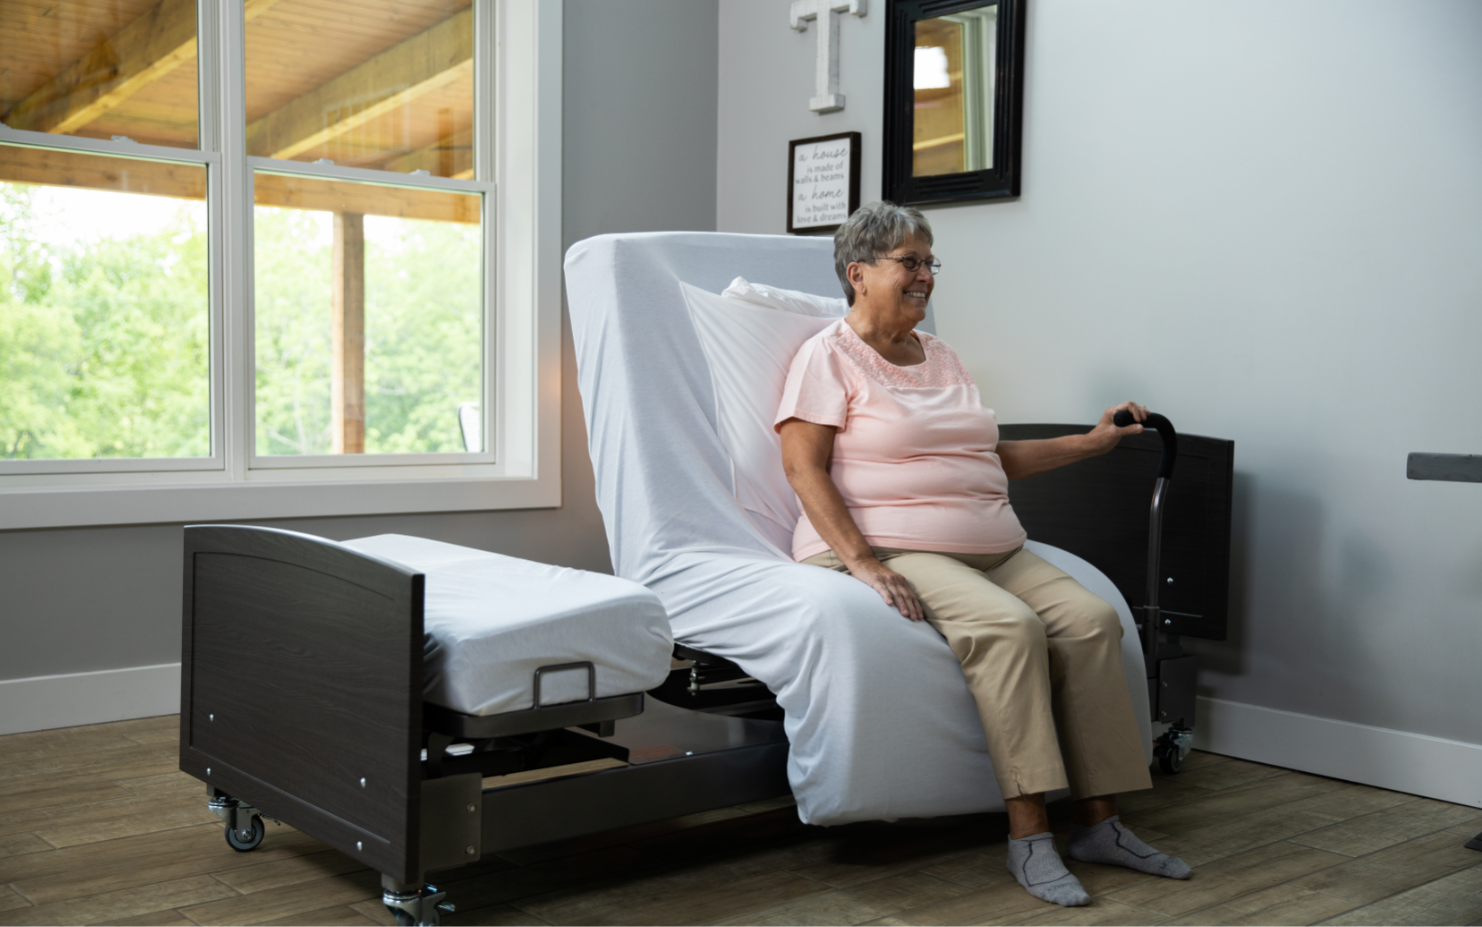 Image of the ActiveCare Fixed Height Hospital Bed mobility bar and woman sitting on hospital bed.